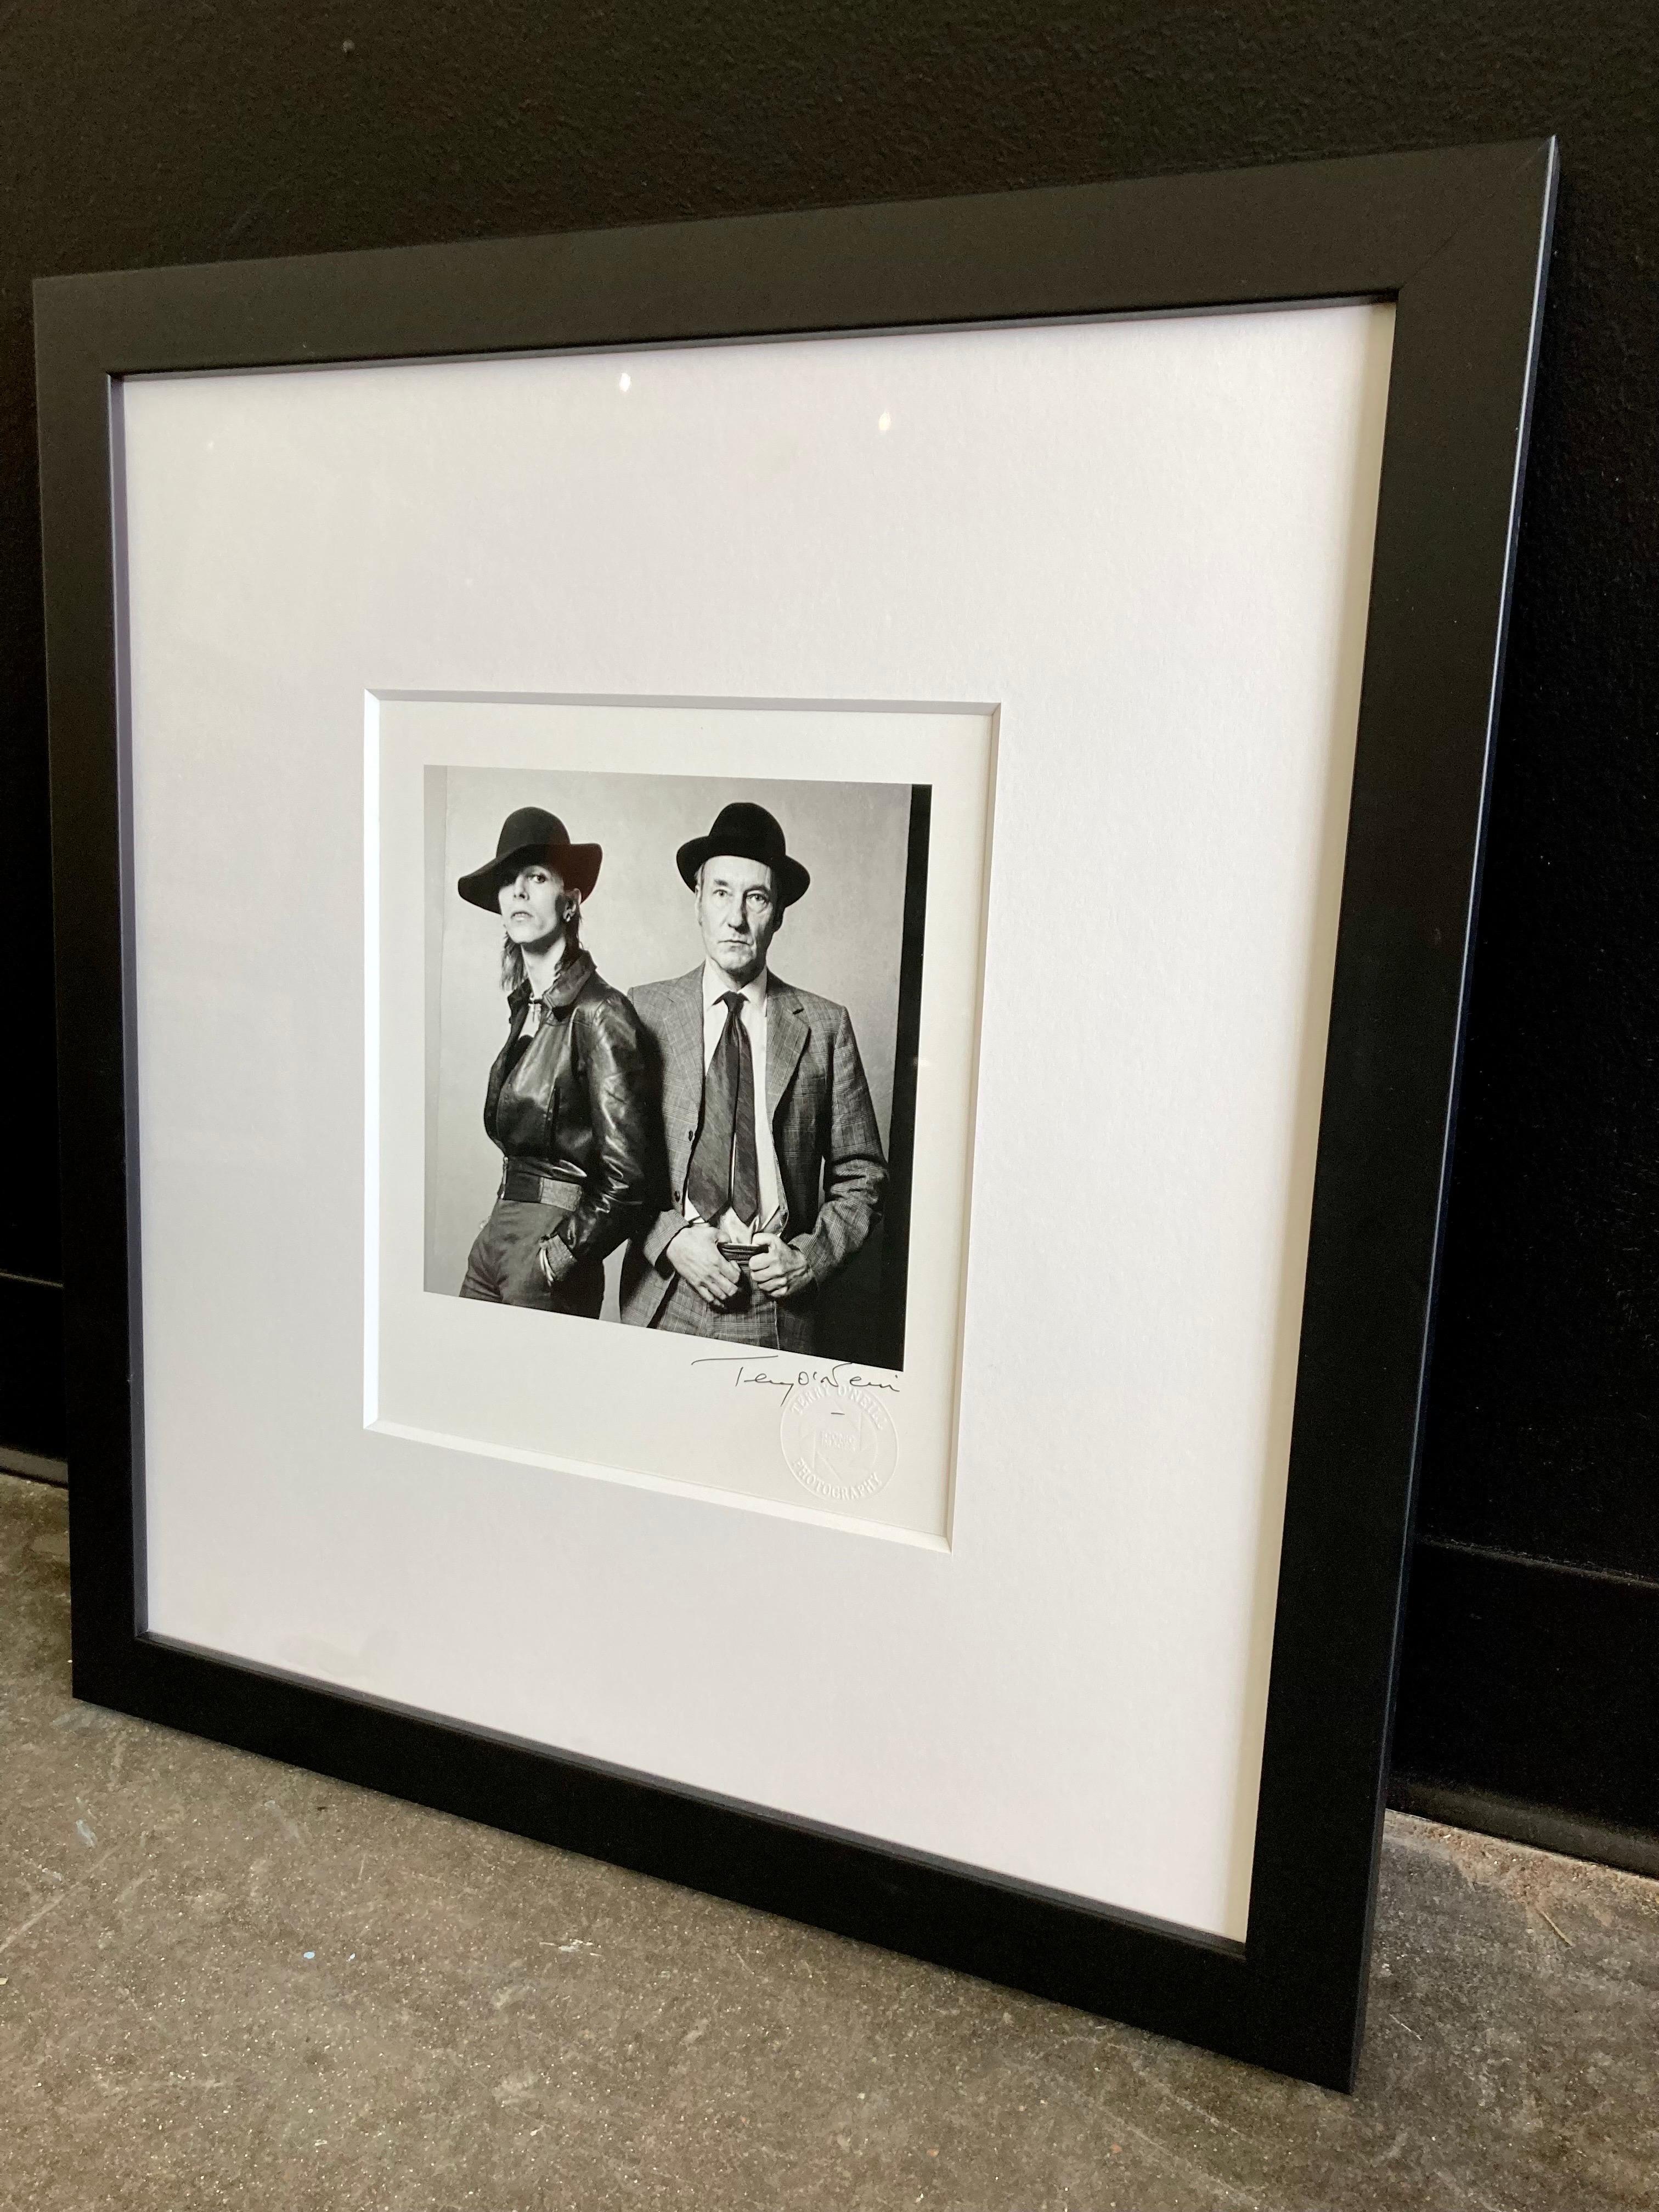 Ready to ship immediately. Free domestic US shipping.

David Bowie and William Burroughs in Los Angeles, February 1974, signed Terry O'Neill, 8x10" print, custom framed with non-glare museum glass, 8ply matting and a simple black frame.

This print